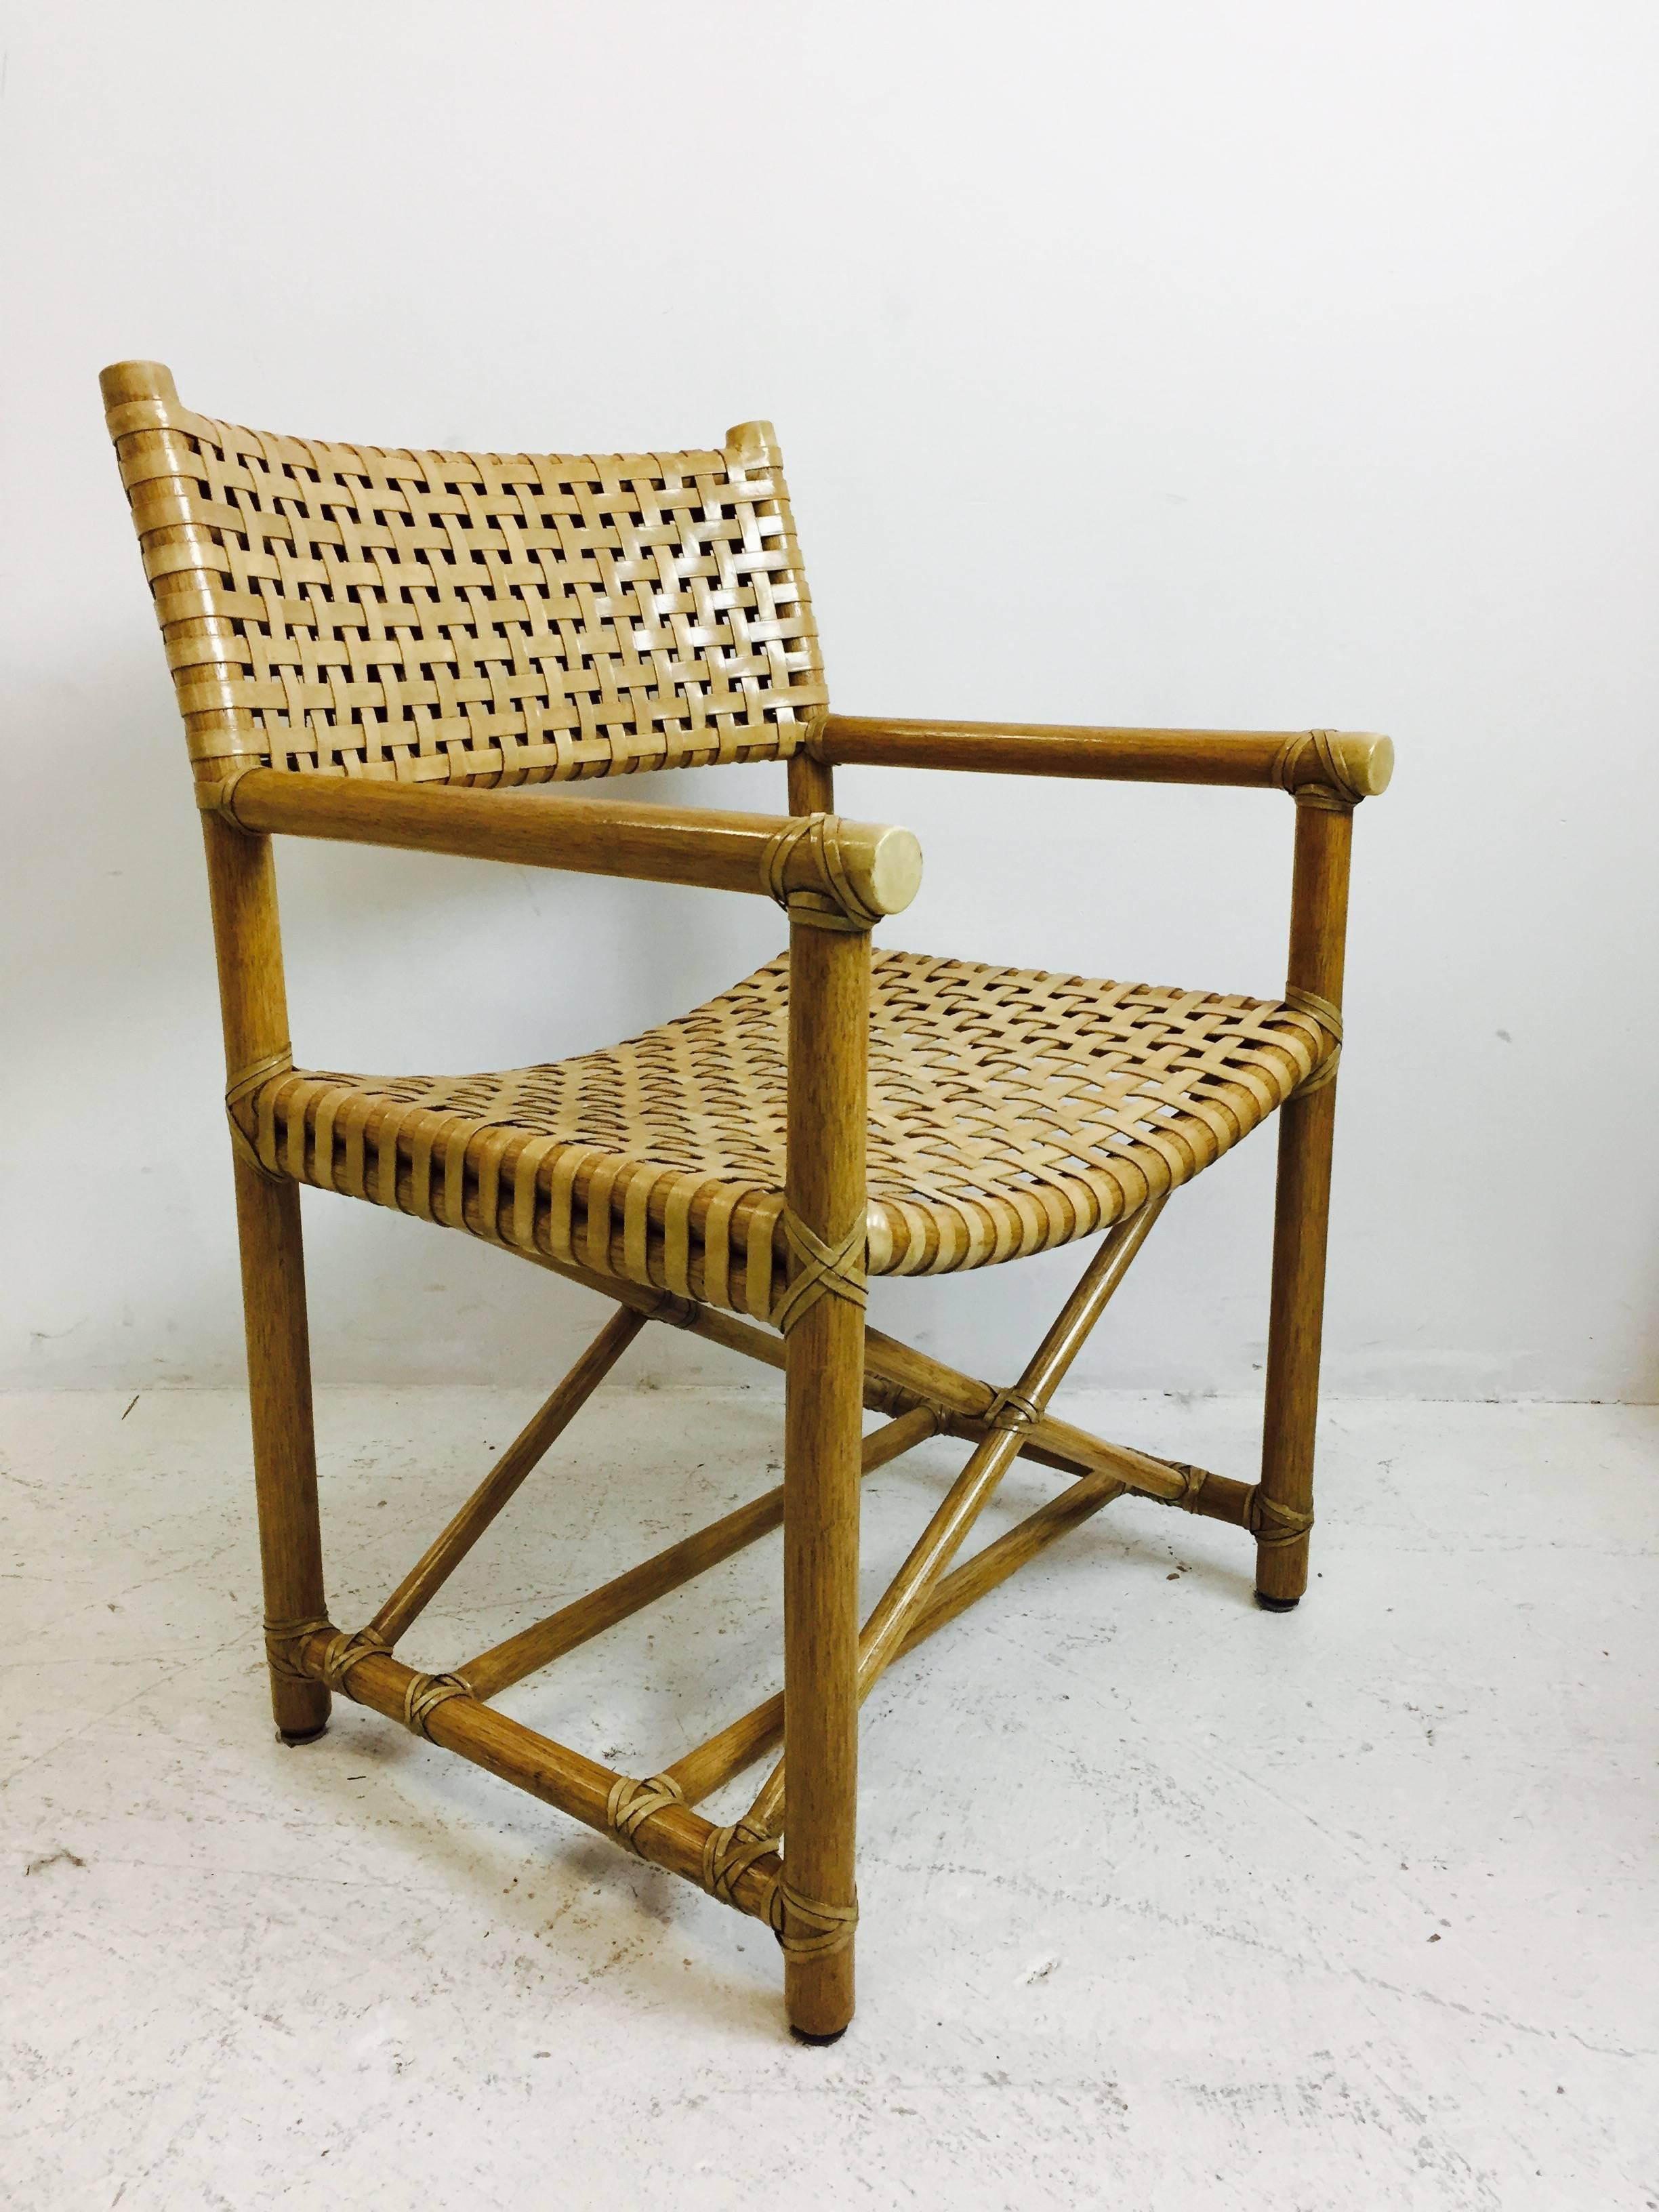 Set of five rattan dining chairs by McGuire. Directors style chairs with X-shaped stretchers. These chairs do need refinishing, circa 1960s.

See our other listing for the McGuire dining table

Dimensions: 22.5" W x 22" D x 34" t
seat